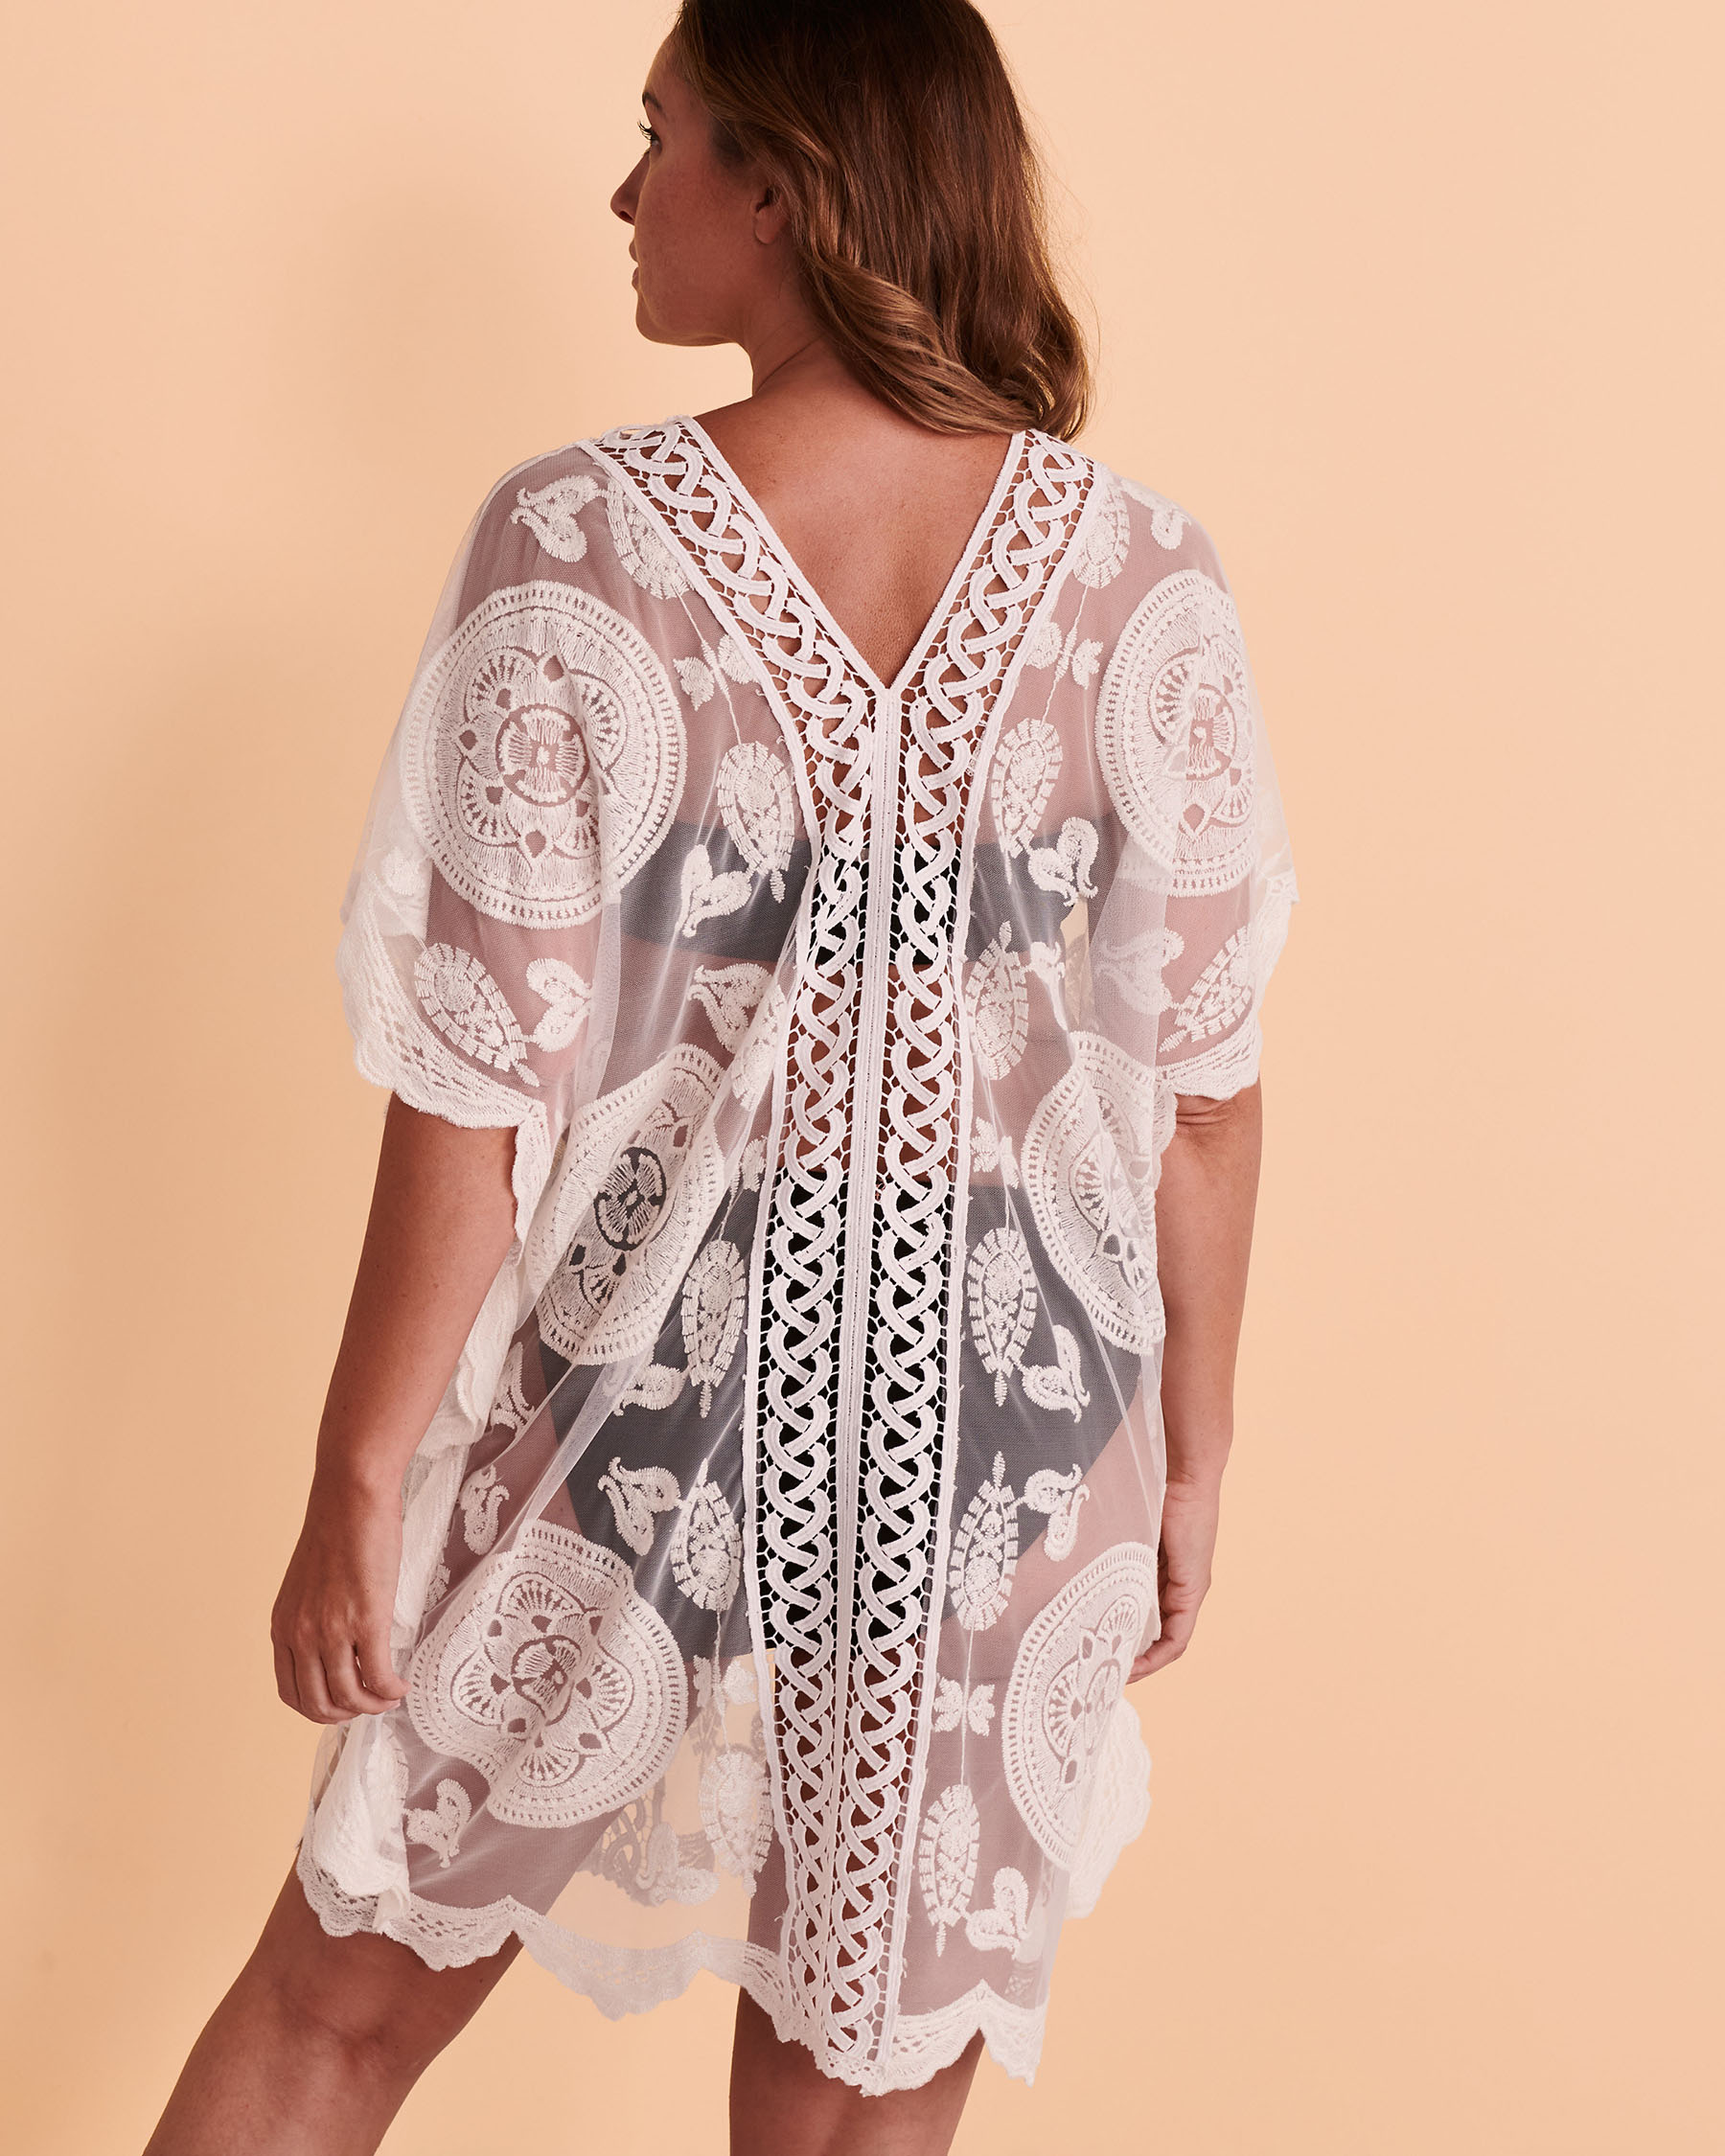 URBAN LUX Mesh and Crochet Caftan White 2058 - View2